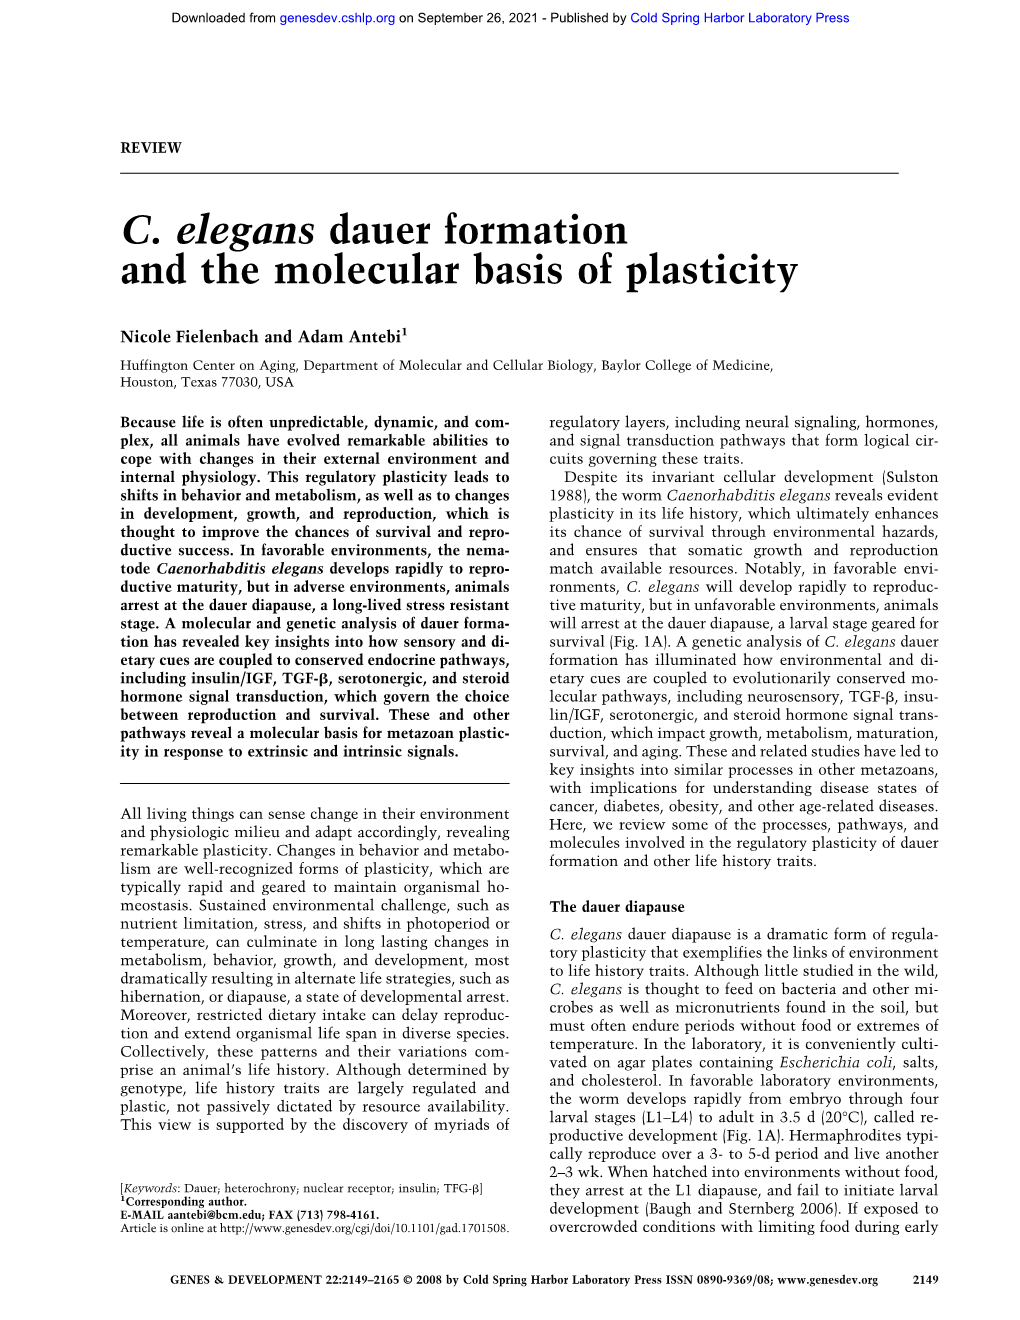 C. Elegans Dauer Formation and the Molecular Basis of Plasticity